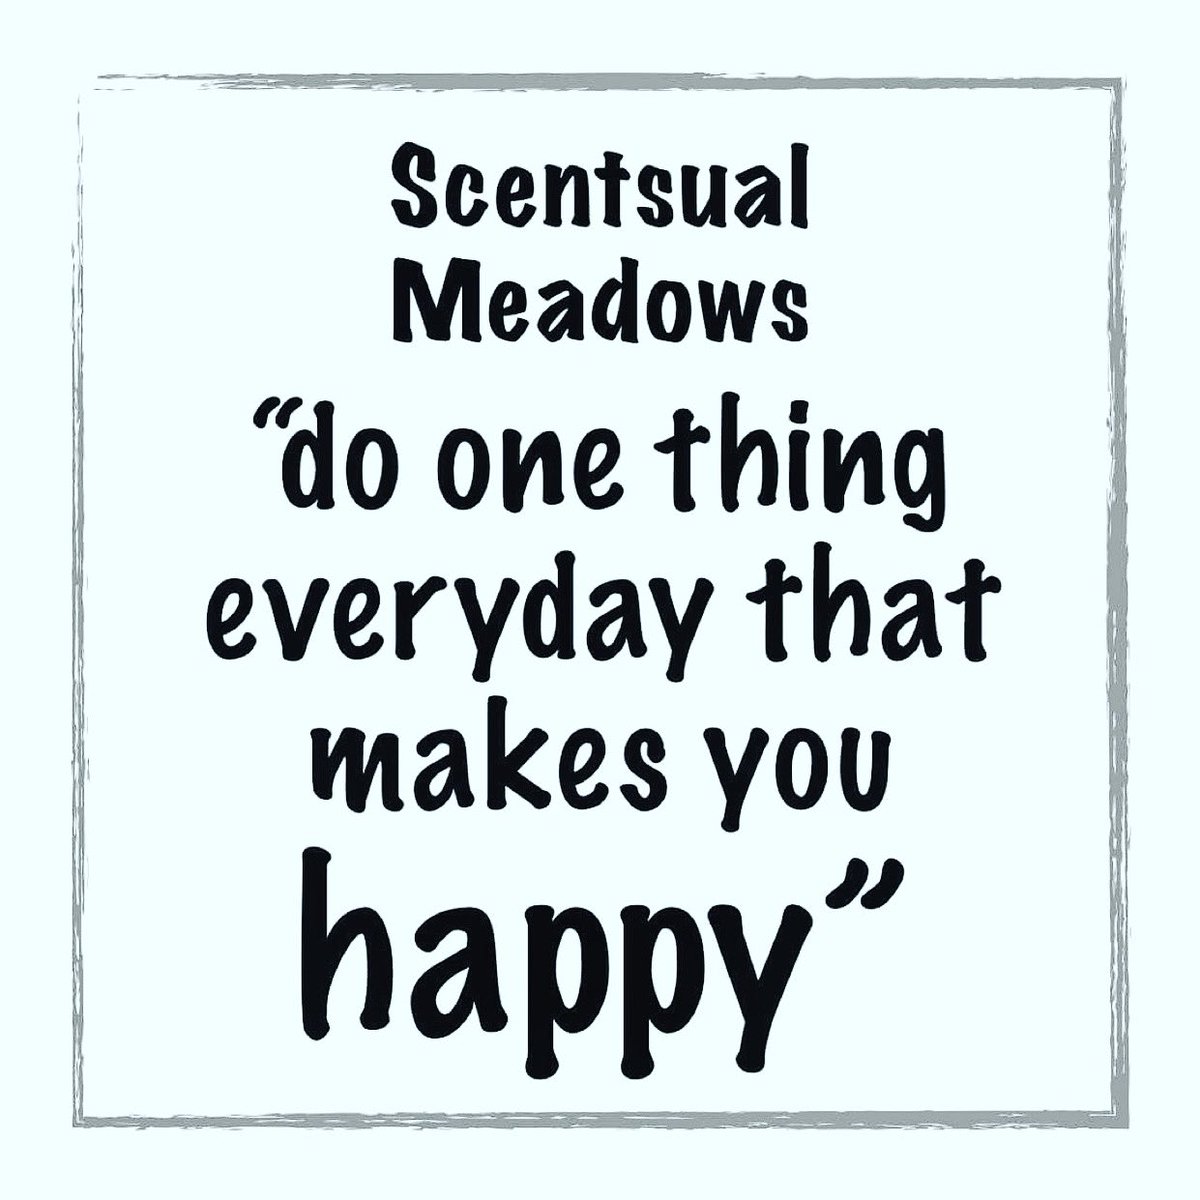 So today I am going to focus on myself! ✌️💜

#ScentsualMeadows #Fragrance #Scent #ForHim #ForHer #Unisex #Luxury #Deal #Bargain #Perfume #Aftershave #TreatYoSelf #DontCompromise #Happy #Happiness #Quote #QuoteOfTheDay #QuotesOfInstagram #QuotesOfInsta #QuotesToLiveBy